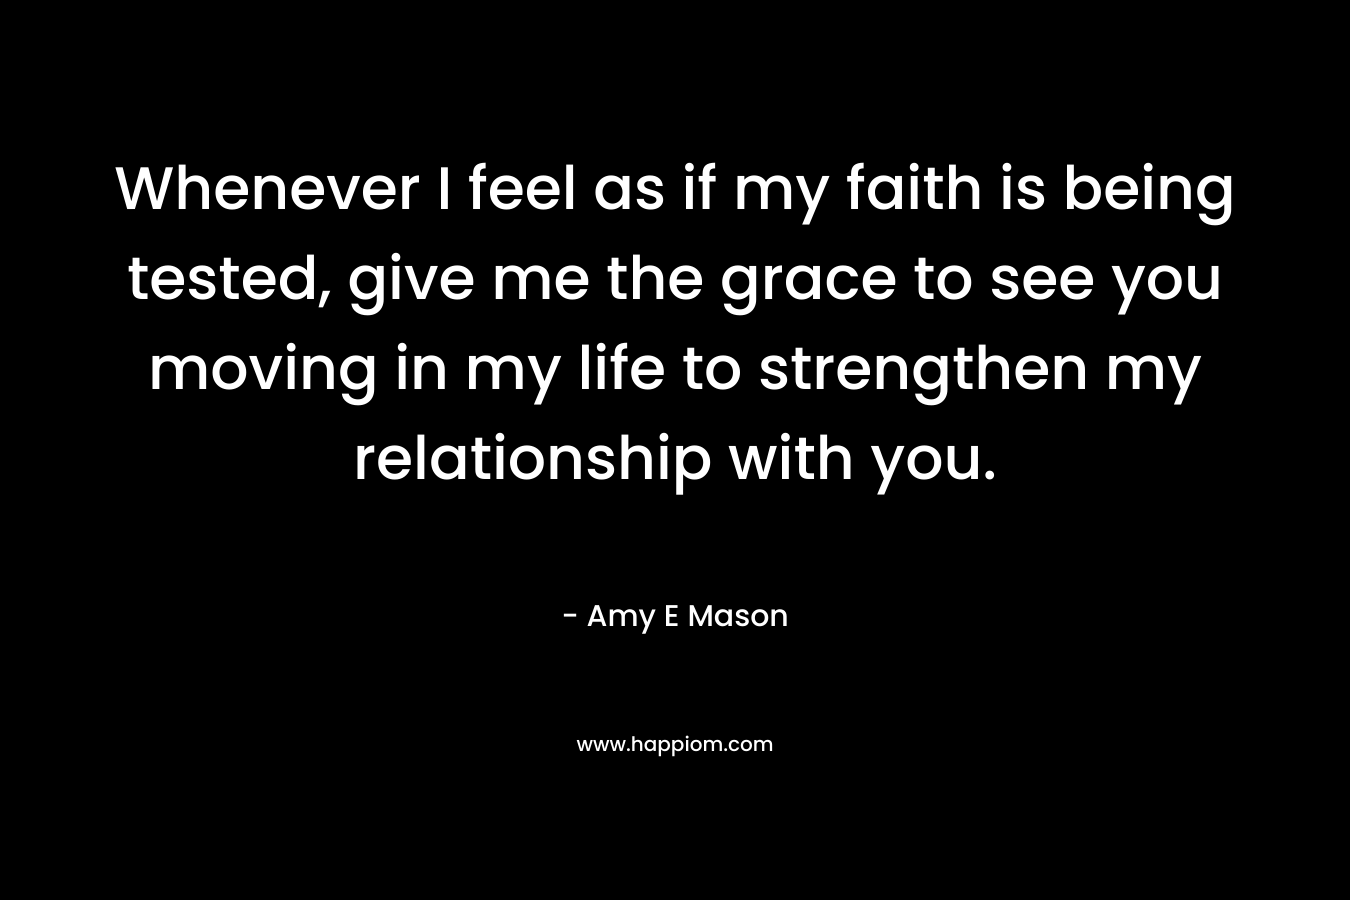 Whenever I feel as if my faith is being tested, give me the grace to see you moving in my life to strengthen my relationship with you. – Amy E Mason